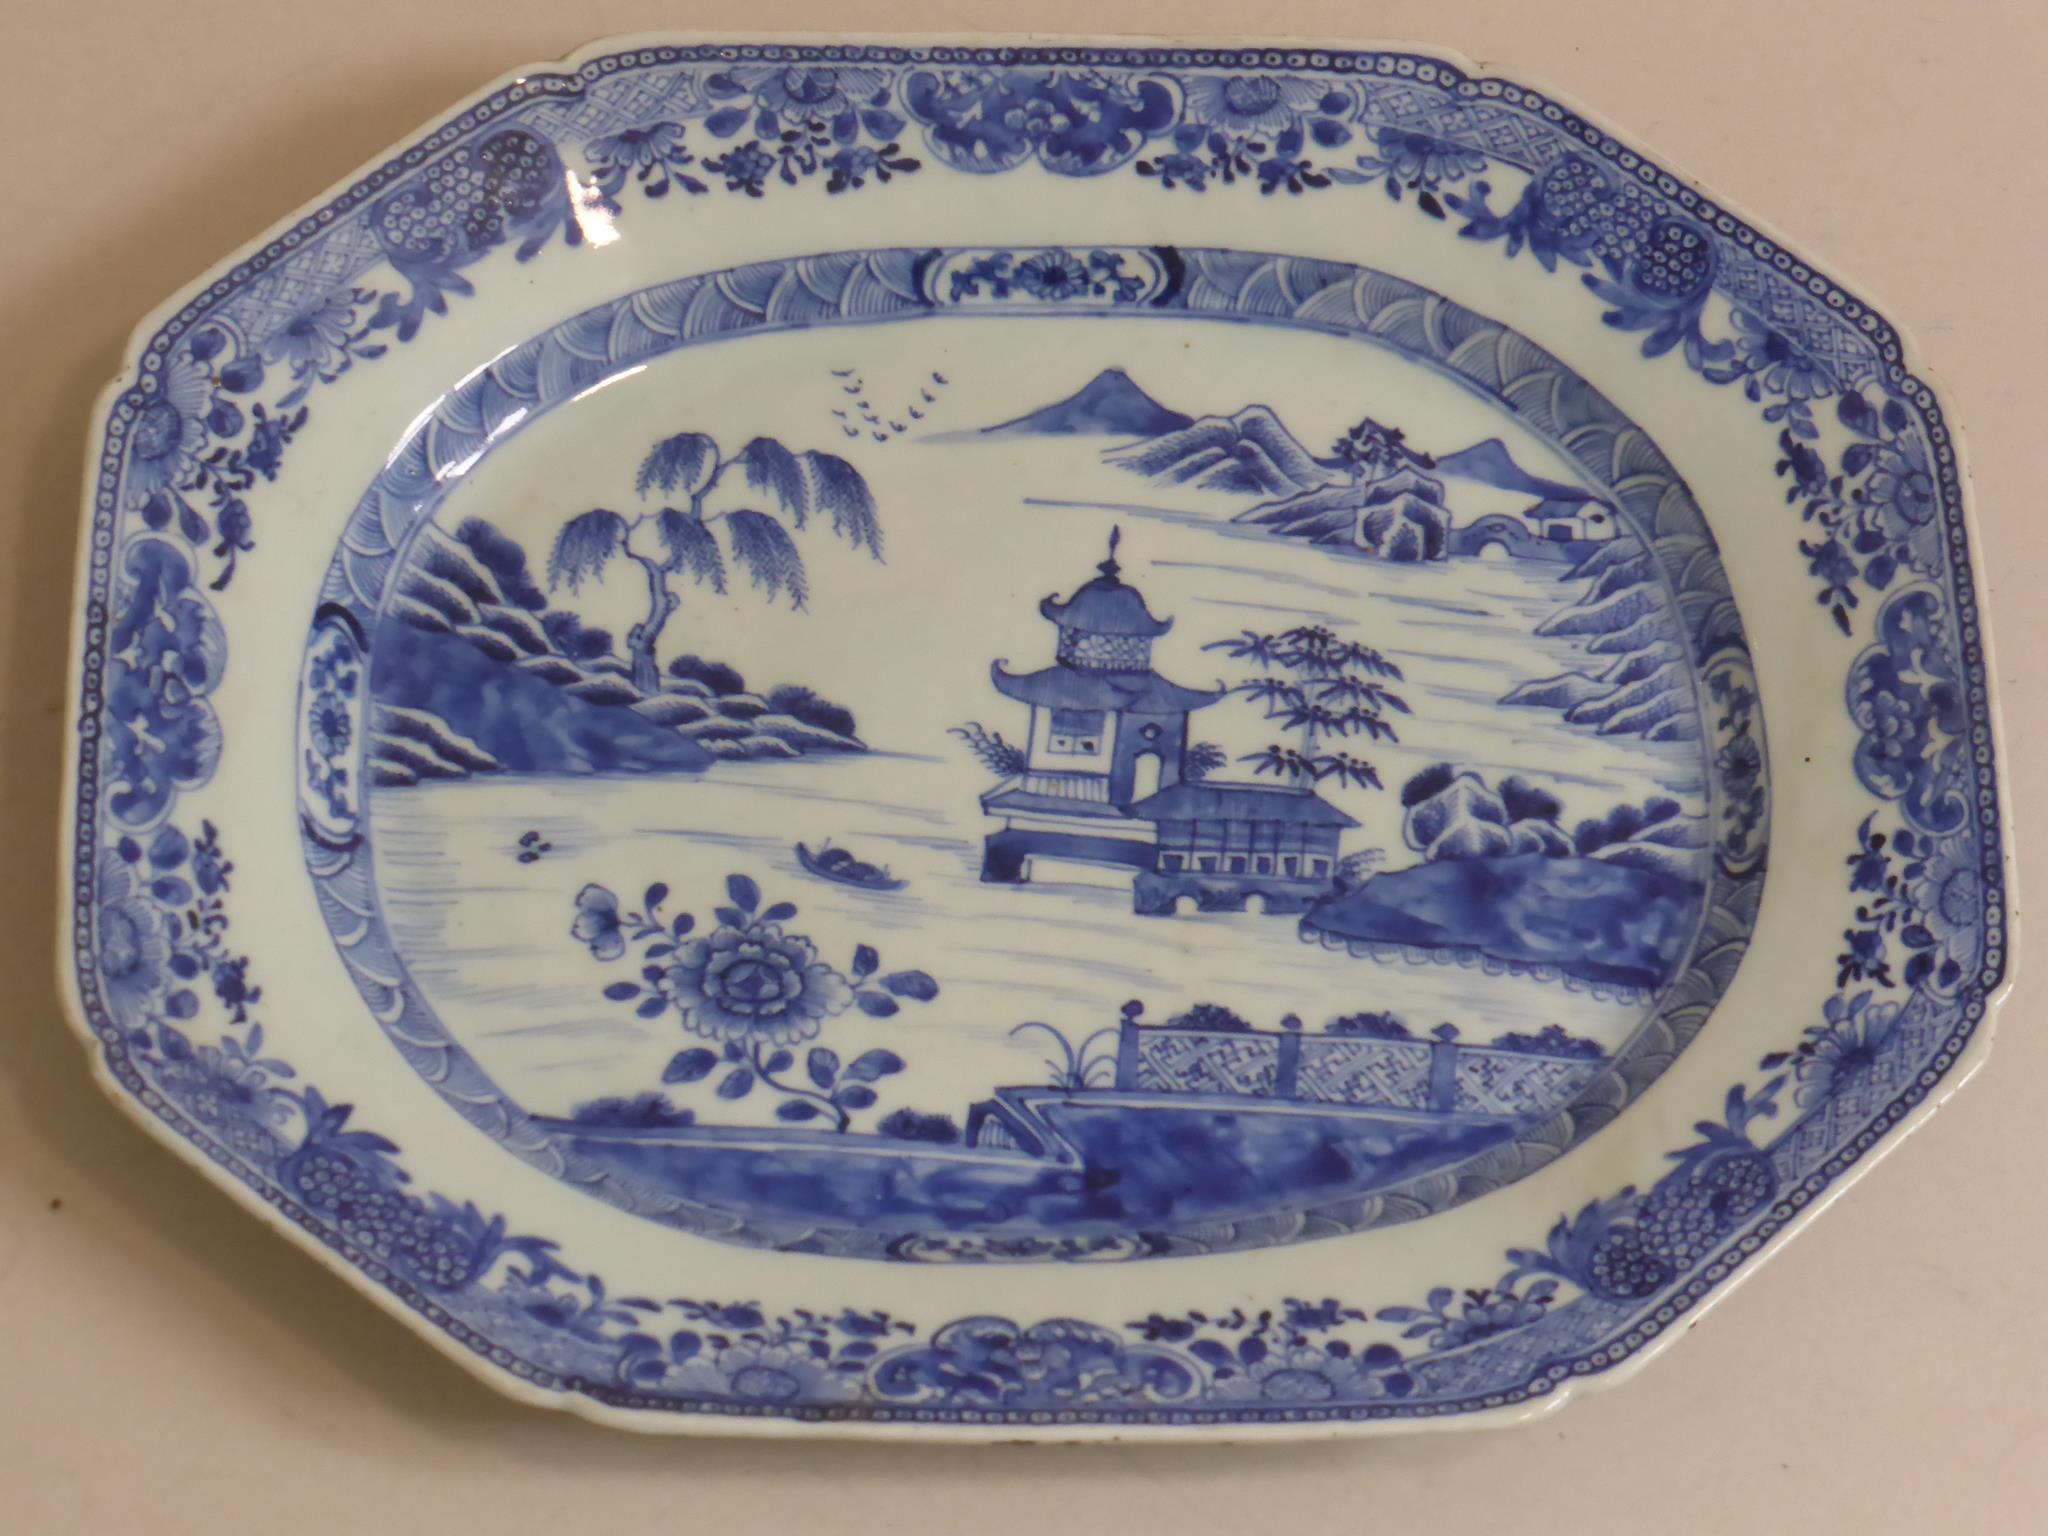 CHINESE EXPORT BLUE AND WHITE MEAT PLATE OF CANTED RECTANGULAR FORM DECORATED WITH PAGODA AND